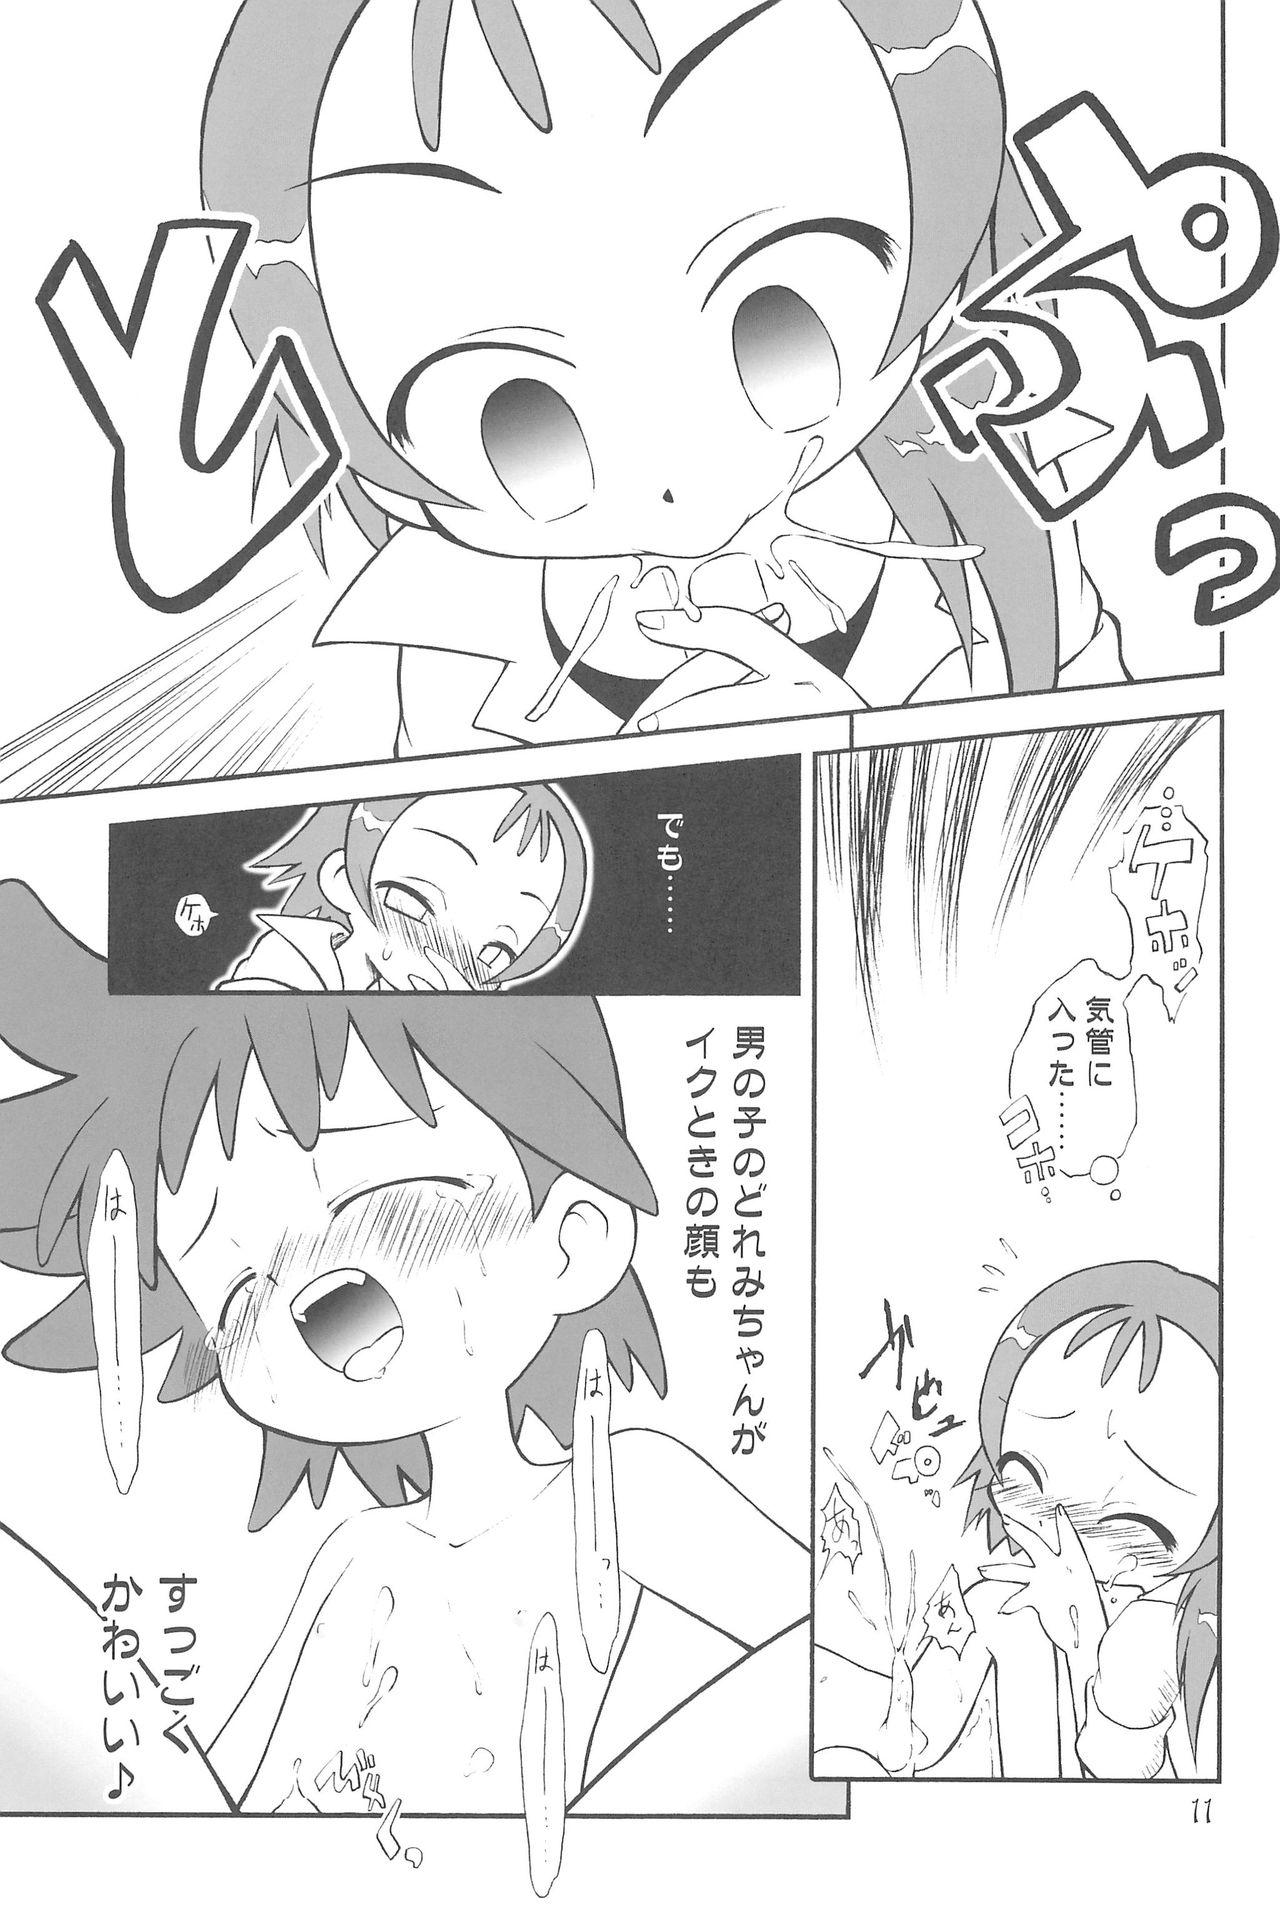 Cream Witch’s Song Plus - Ojamajo doremi Star - Page 11